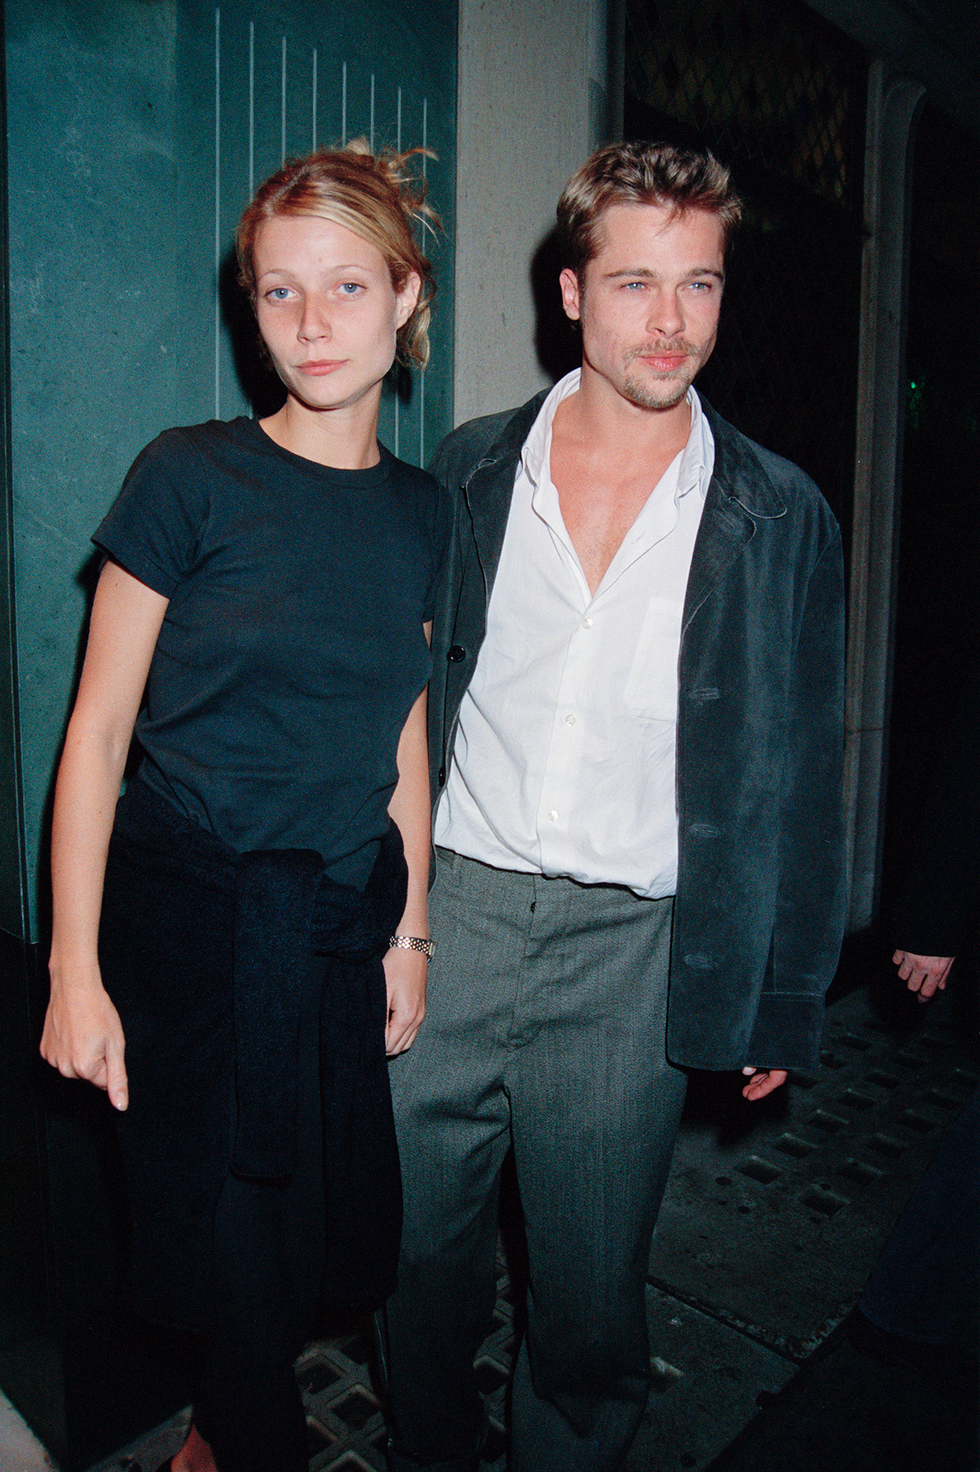 gwyneth paltrow and brad pitt at the ivy in 1995